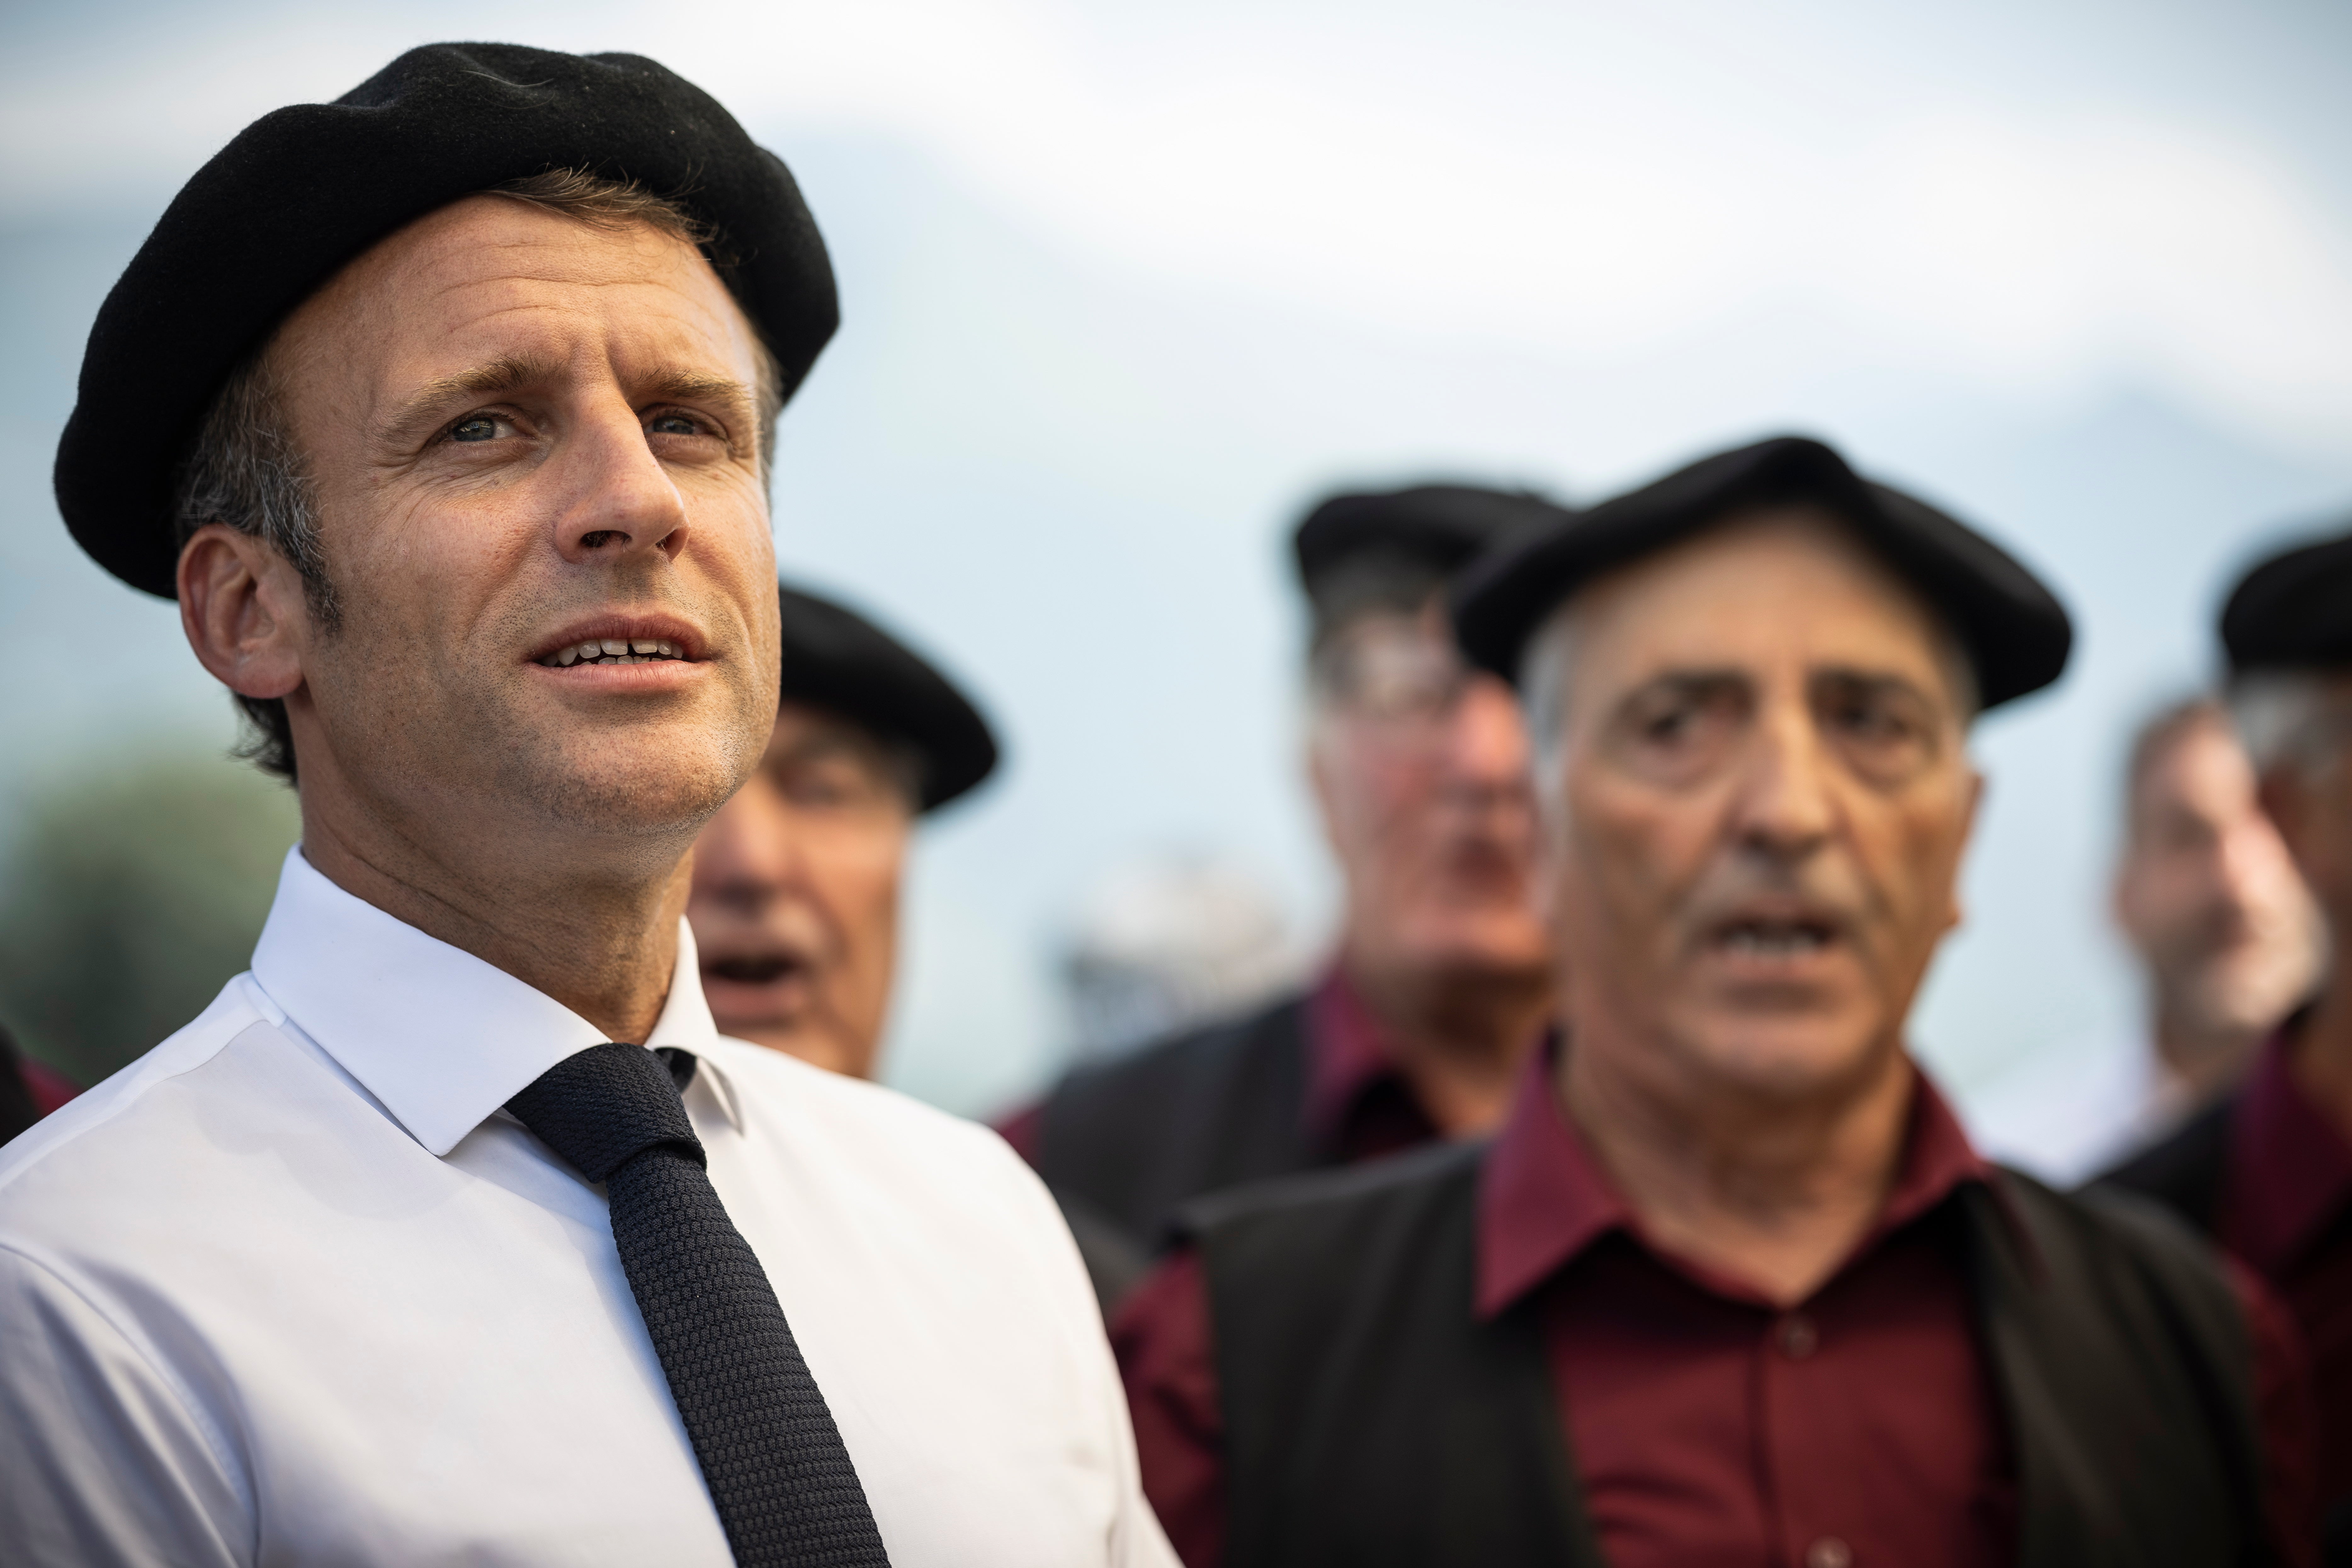 French President Emmanuel Macron sings during a visit to Argeles-Gazost, southern France